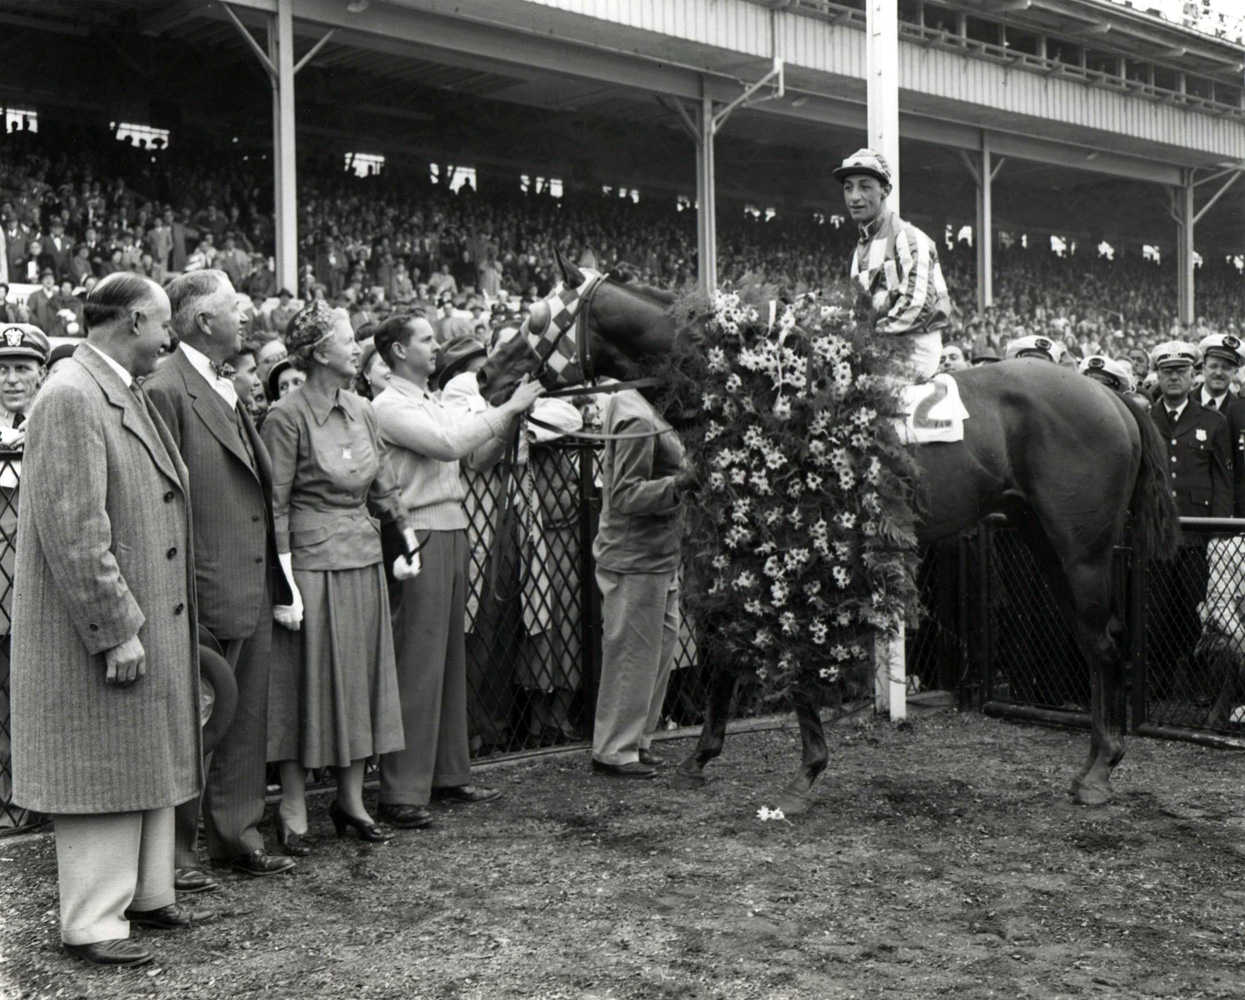 Winner's circle photograph for the 1950 Preakness Stakes at Pimlico, won by Christopher Chenery's Hill Prince(Eddie Arcaro up) (Keeneland Library Morgan Collection/Museum Collection)